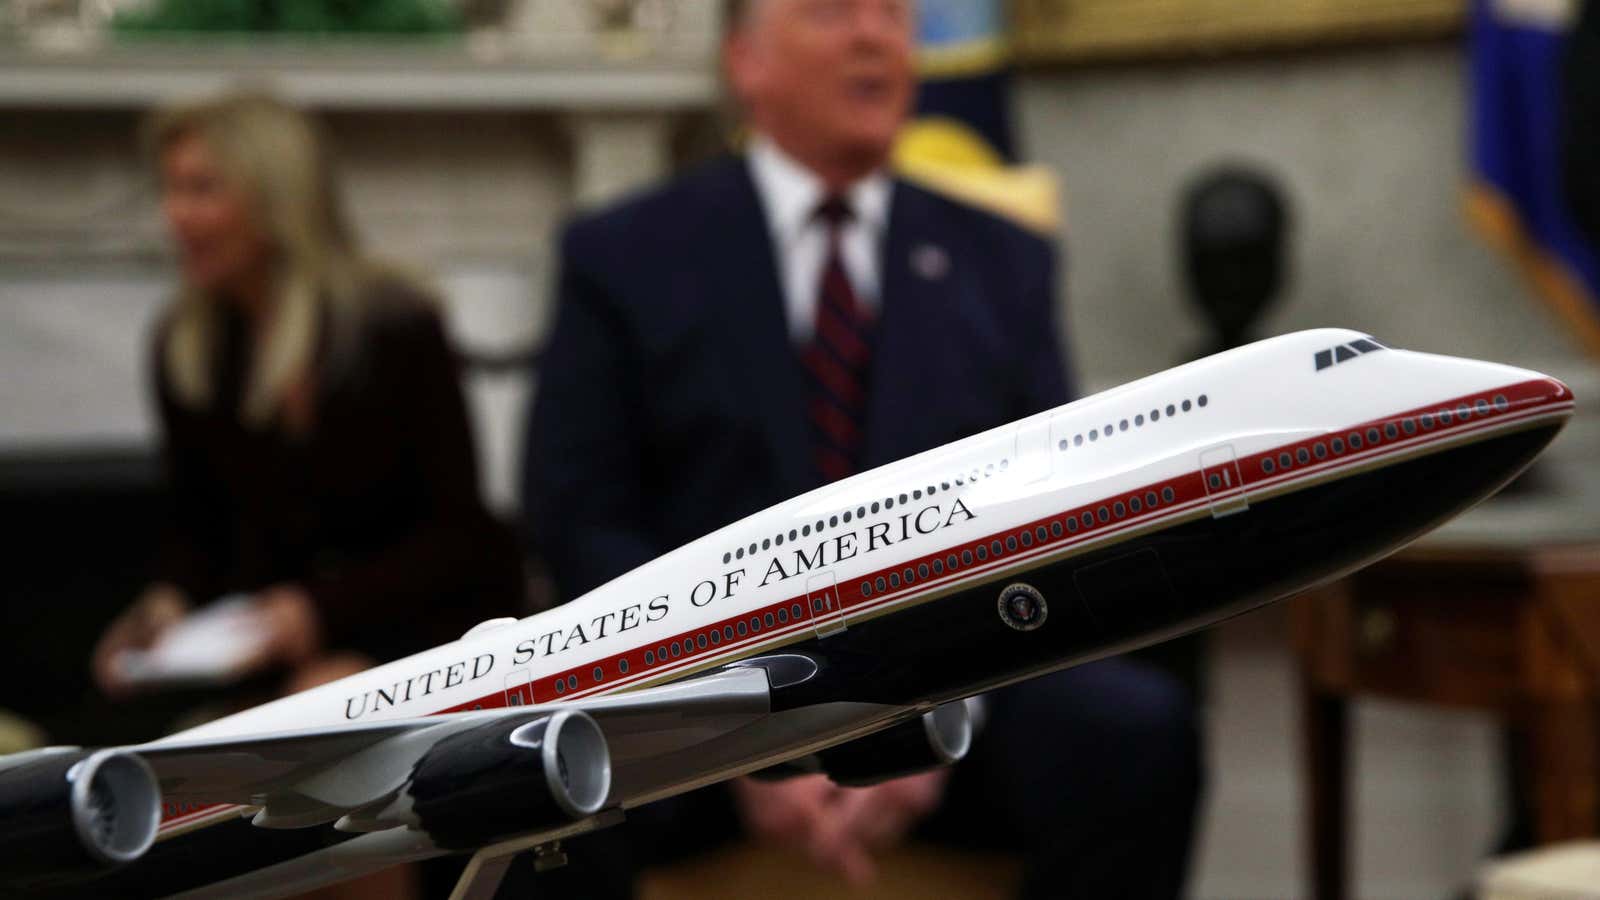 Trump Air Force One Paint Job Could Overheat Plane - Gizmodo